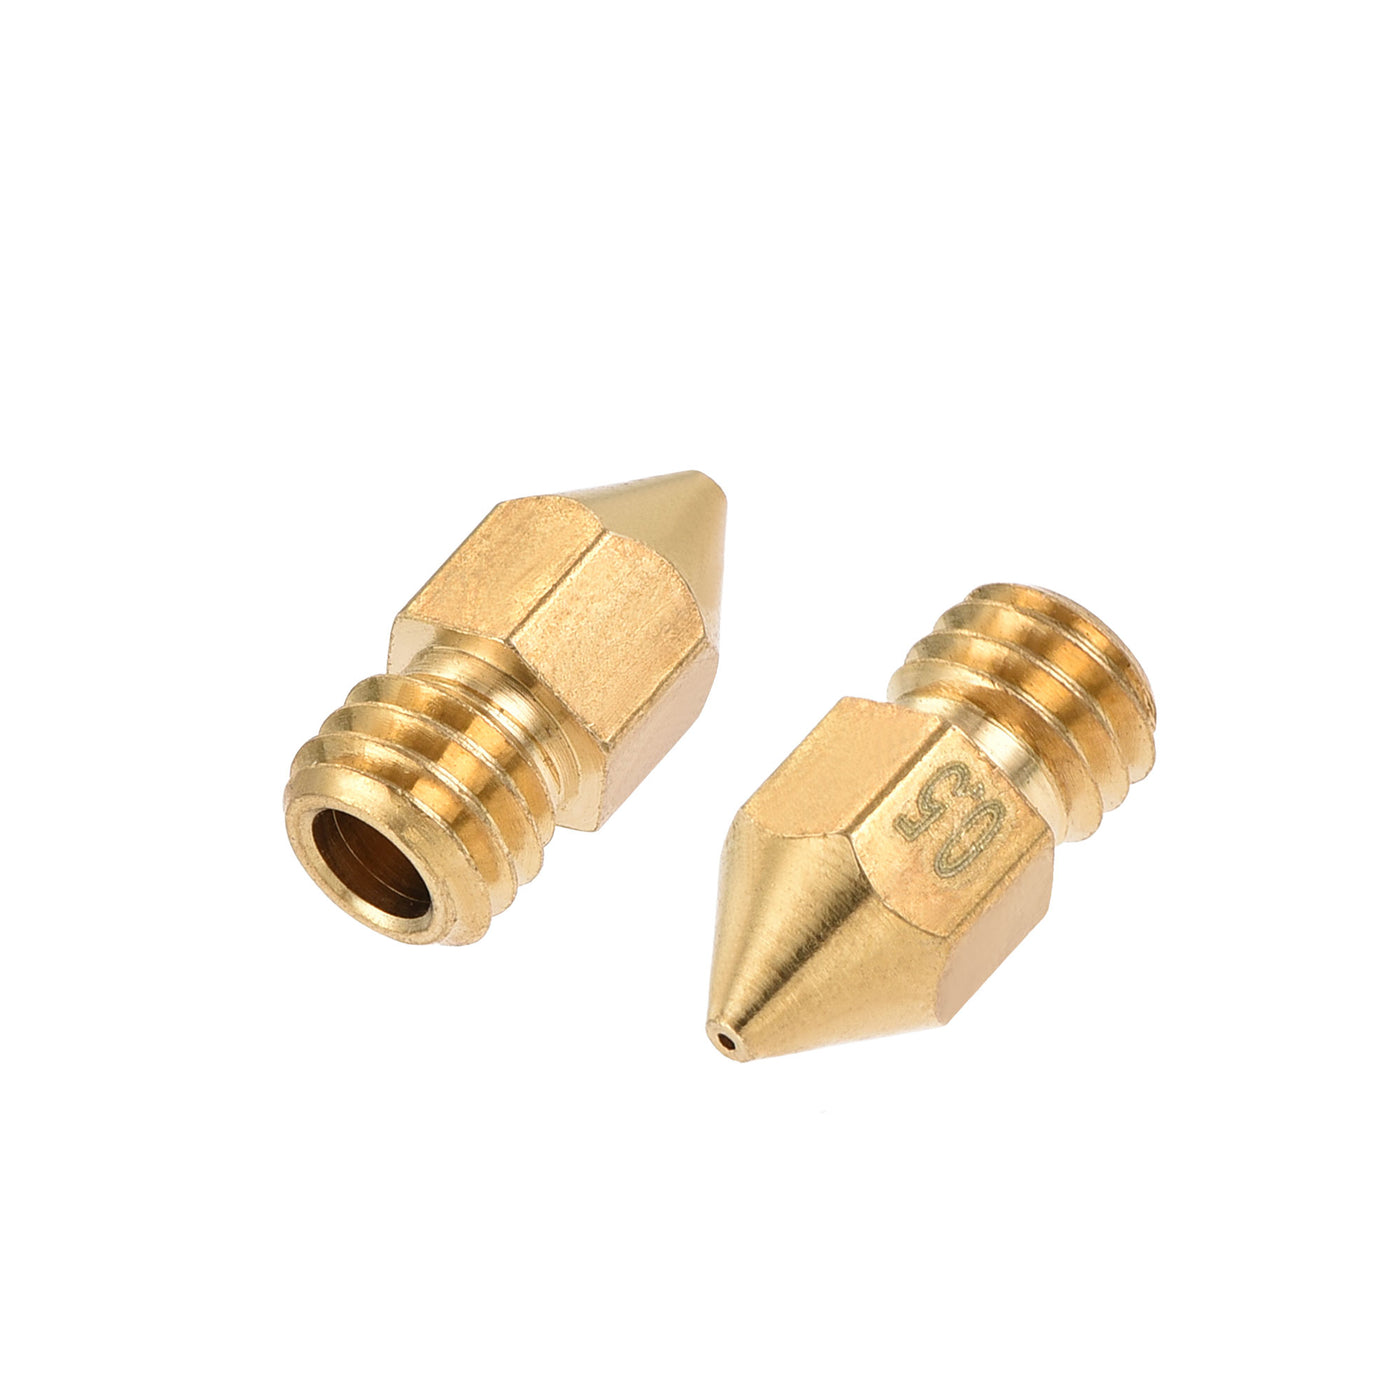 uxcell Uxcell 0.5mm 3D Printer Nozzle, 24pcs M6 Thread for MK8 3mm Extruder Print, Brass